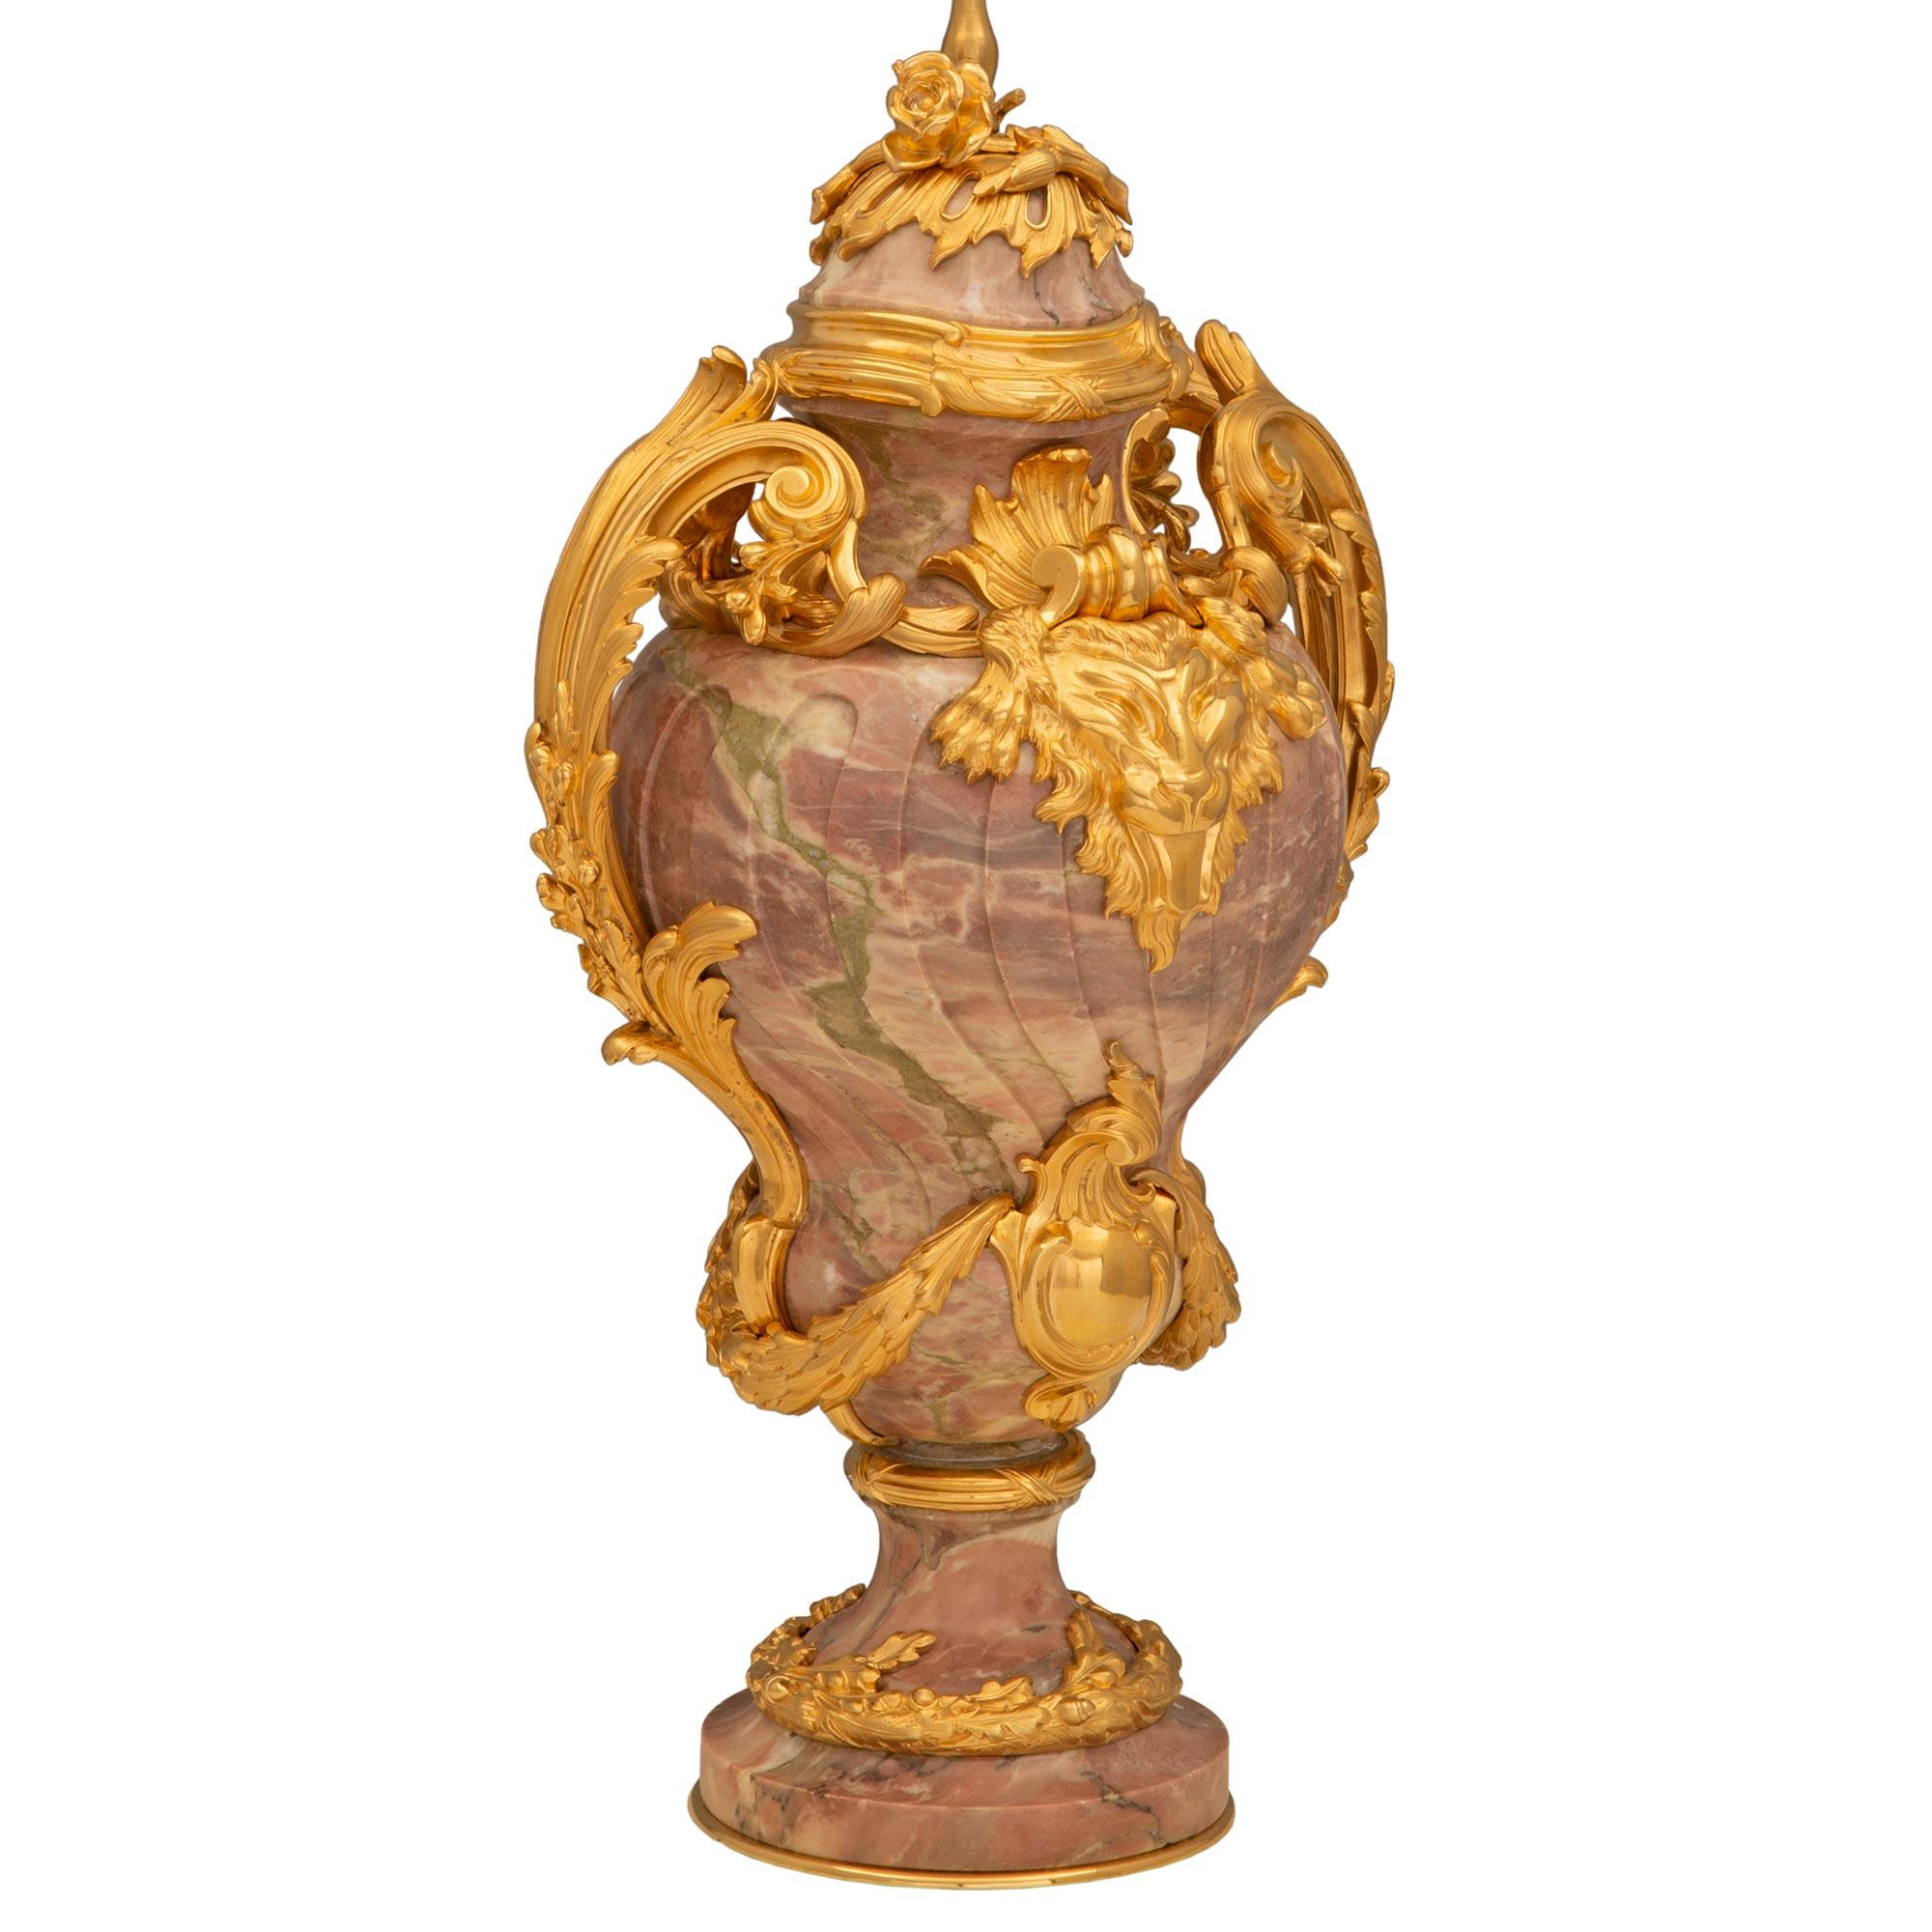 A beautiful French 19th century Louis XVI st. ormolu and Brèche Violette marble lamp. The lamp is raised by an elegant circular base with a lovely curved shape, a fine bottom ormolu fillet, and a striking wrap around oak leaf band with charming